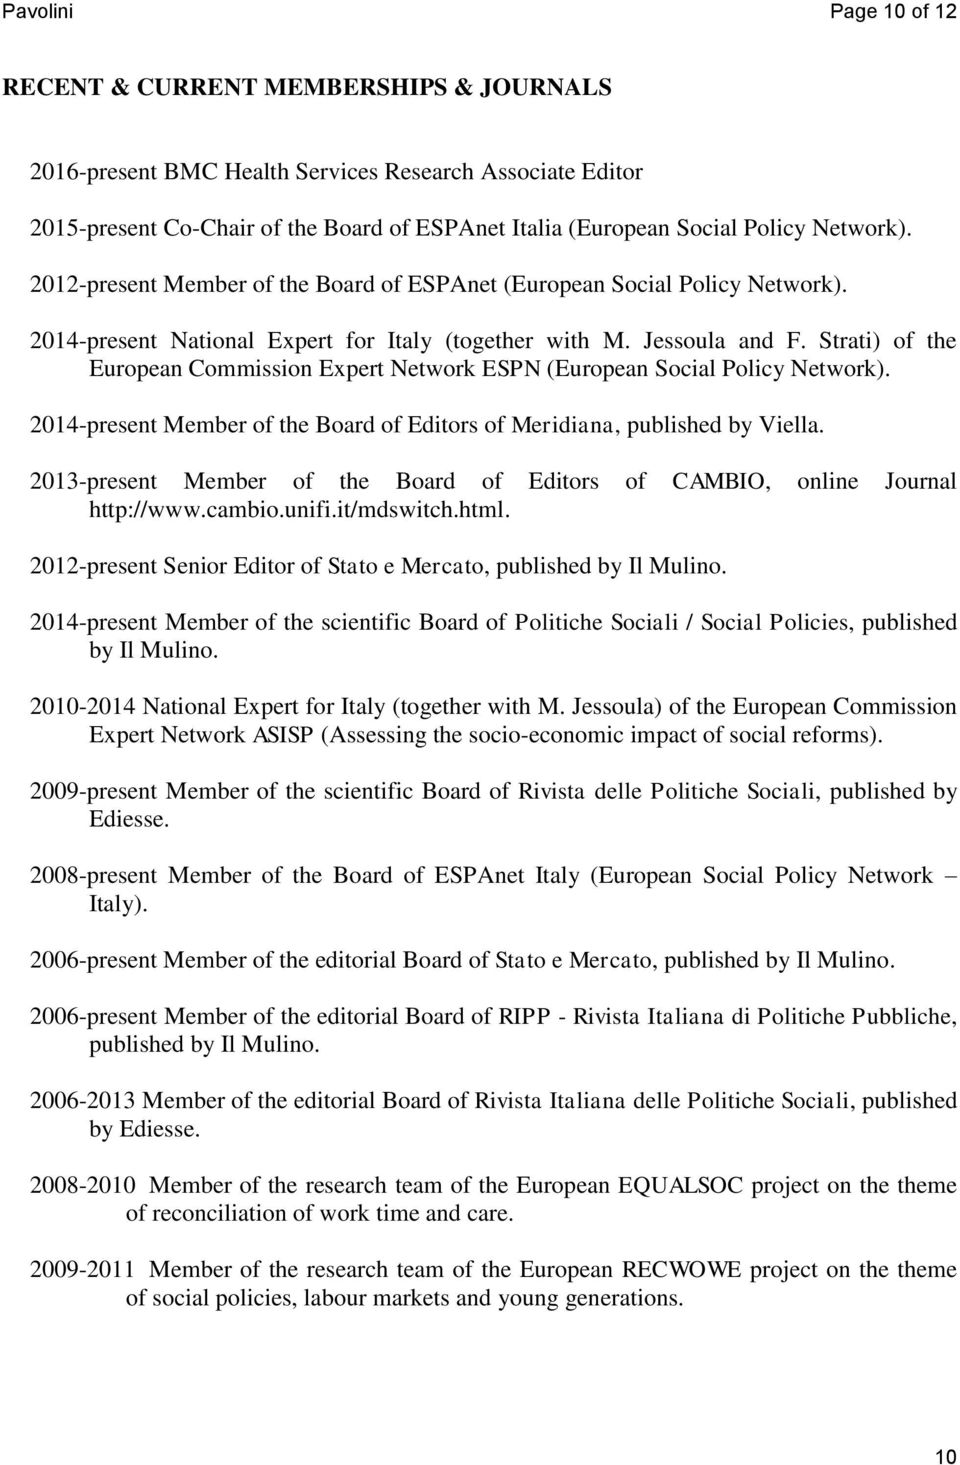 Strati) of the European Commission Expert Network ESPN (European Social Policy Network). 2014-present Member of the Board of Editors of Meridiana, published by Viella.